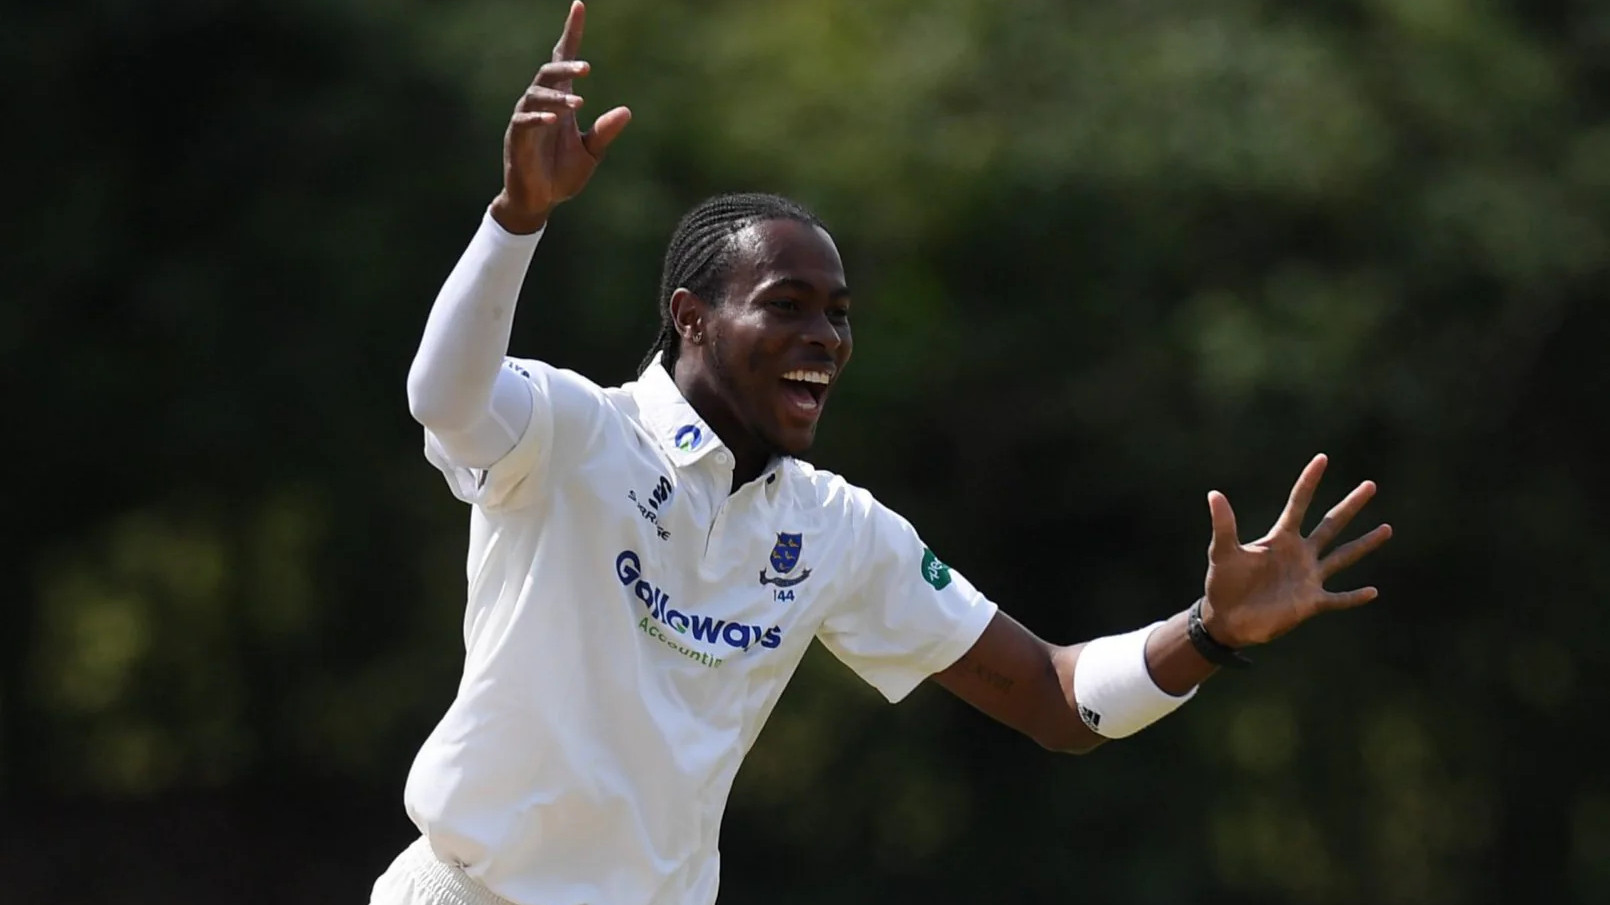 Jofra Archer's England team selection in doubt as elbow injury resurfaces during county match